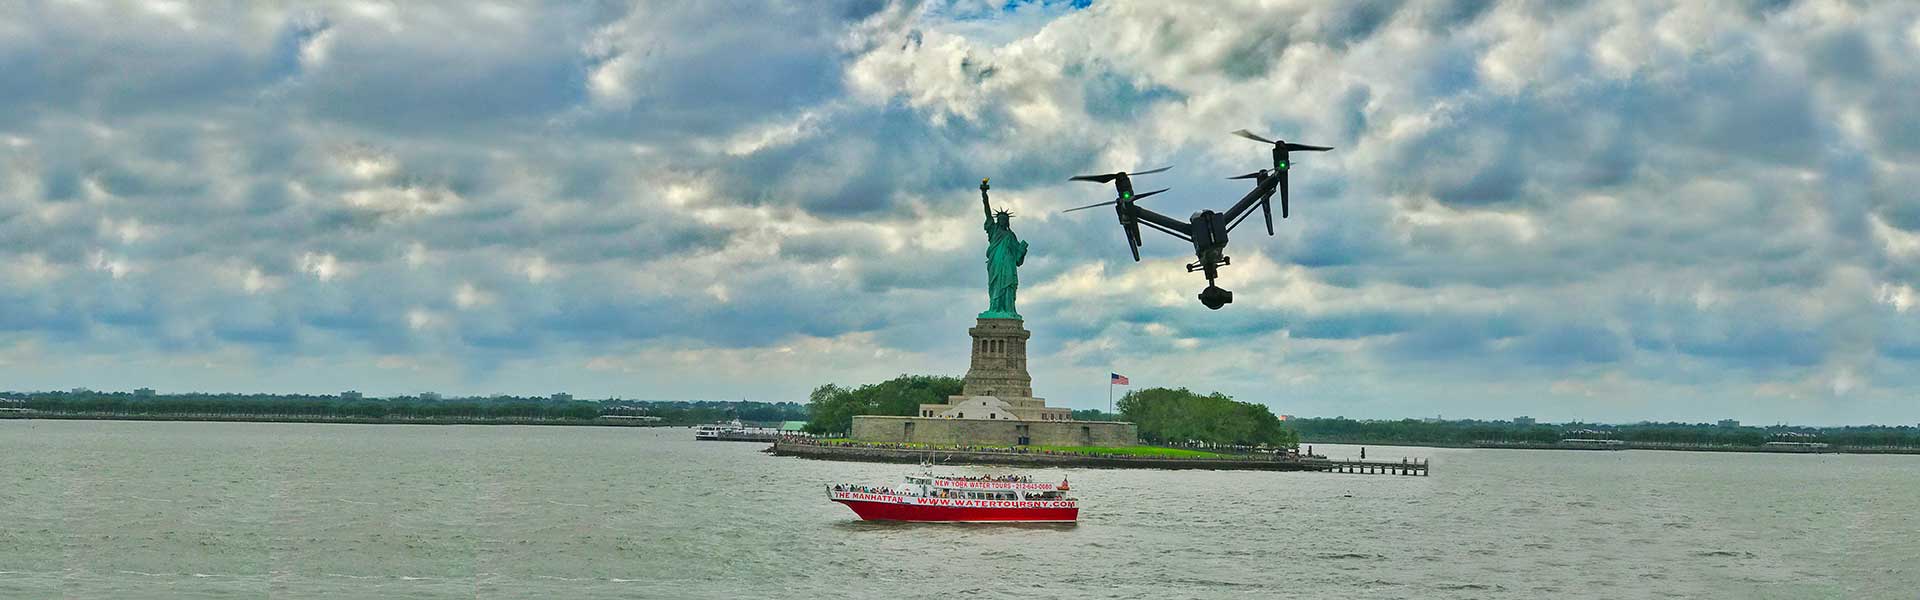 professional drone pilots near me, drone photography in New York City, professional drone cinematography services, drone footage, drone video, drone photography, drone services, NYC, northeast coast, Xizmo Media